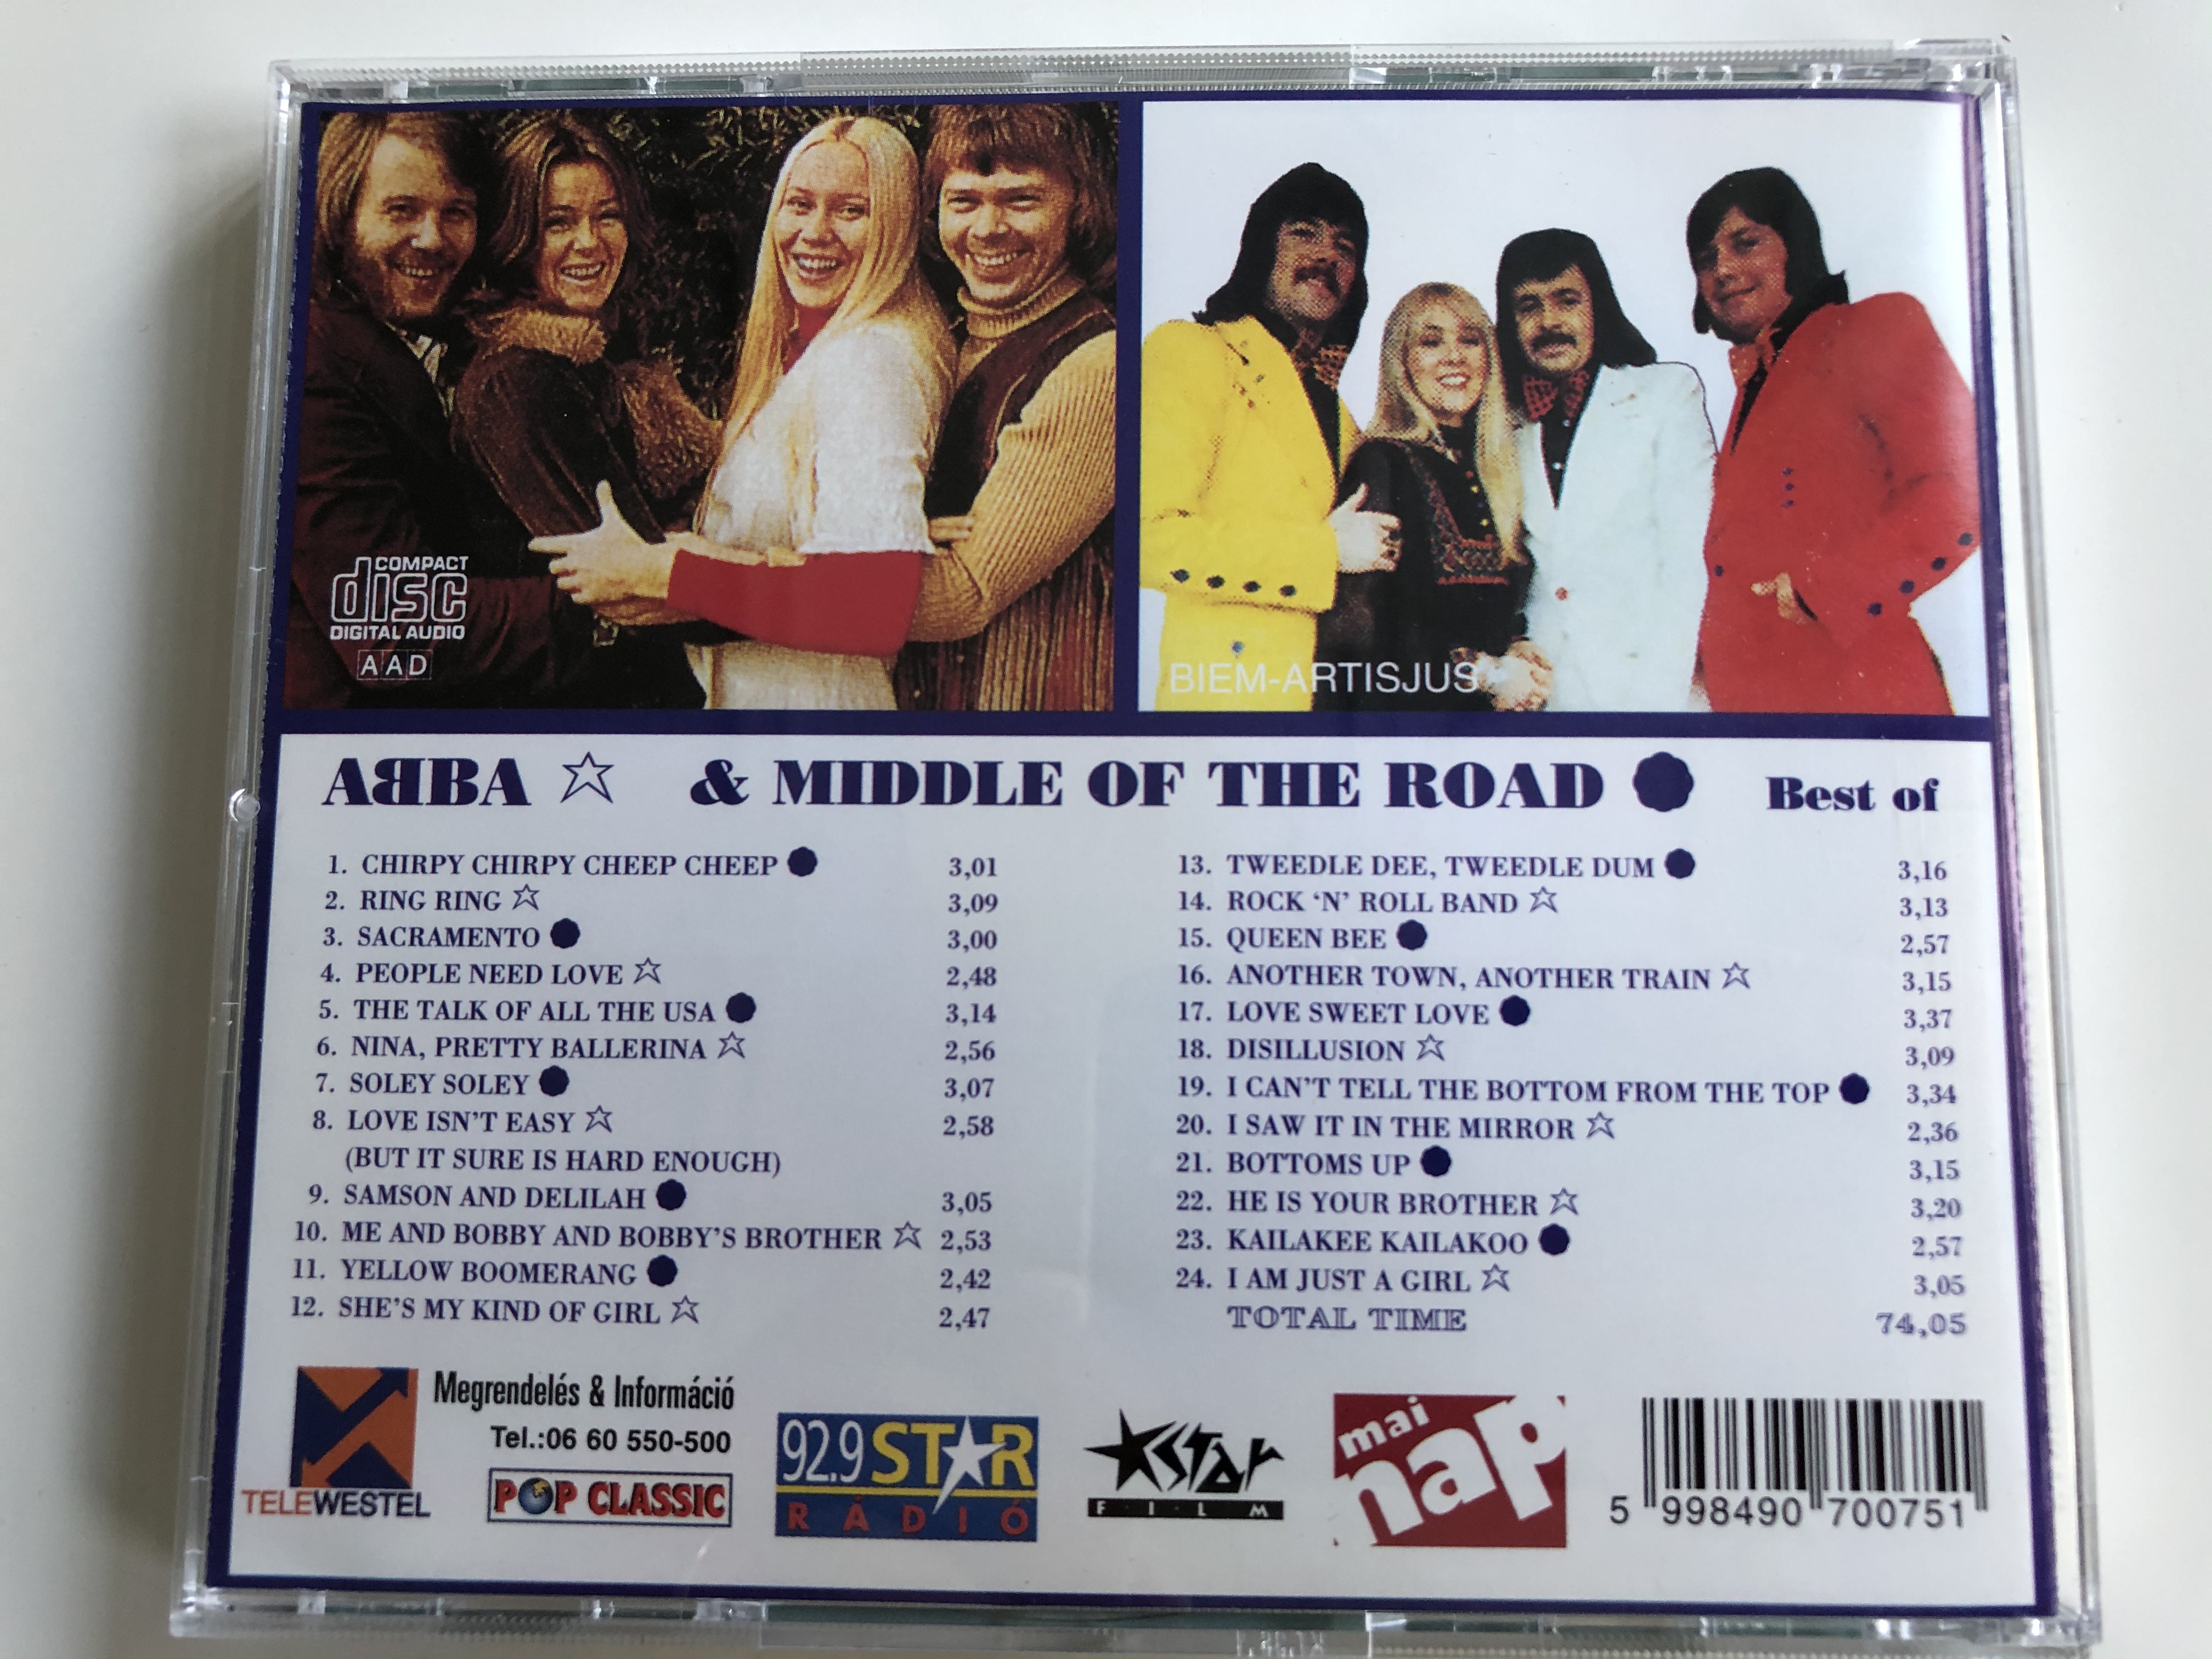 abba-middle-of-the-road-best-of-pop-classic-euroton-audio-cd-eucd-0075-3-.jpg